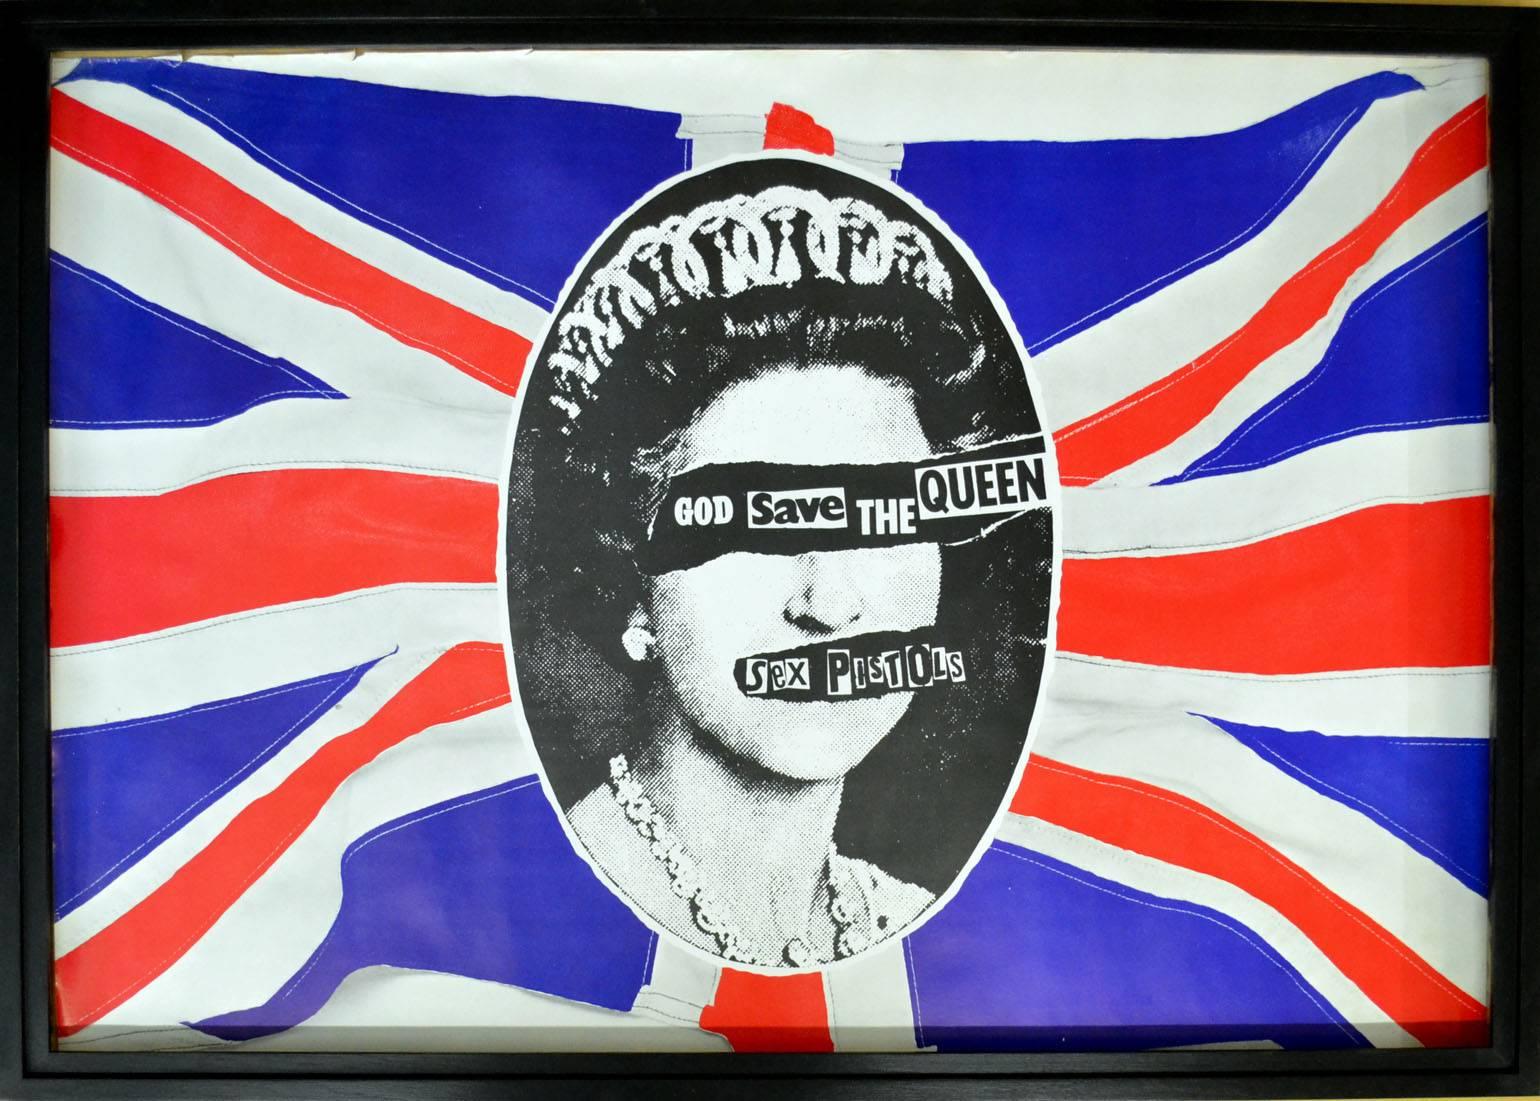 Innovators not only in music, the Sex Pistols are responsible for some of the most striking artwork in modern popular culture.
The band has always been closely involved with overseeing and producing their own artwork and have a long history of